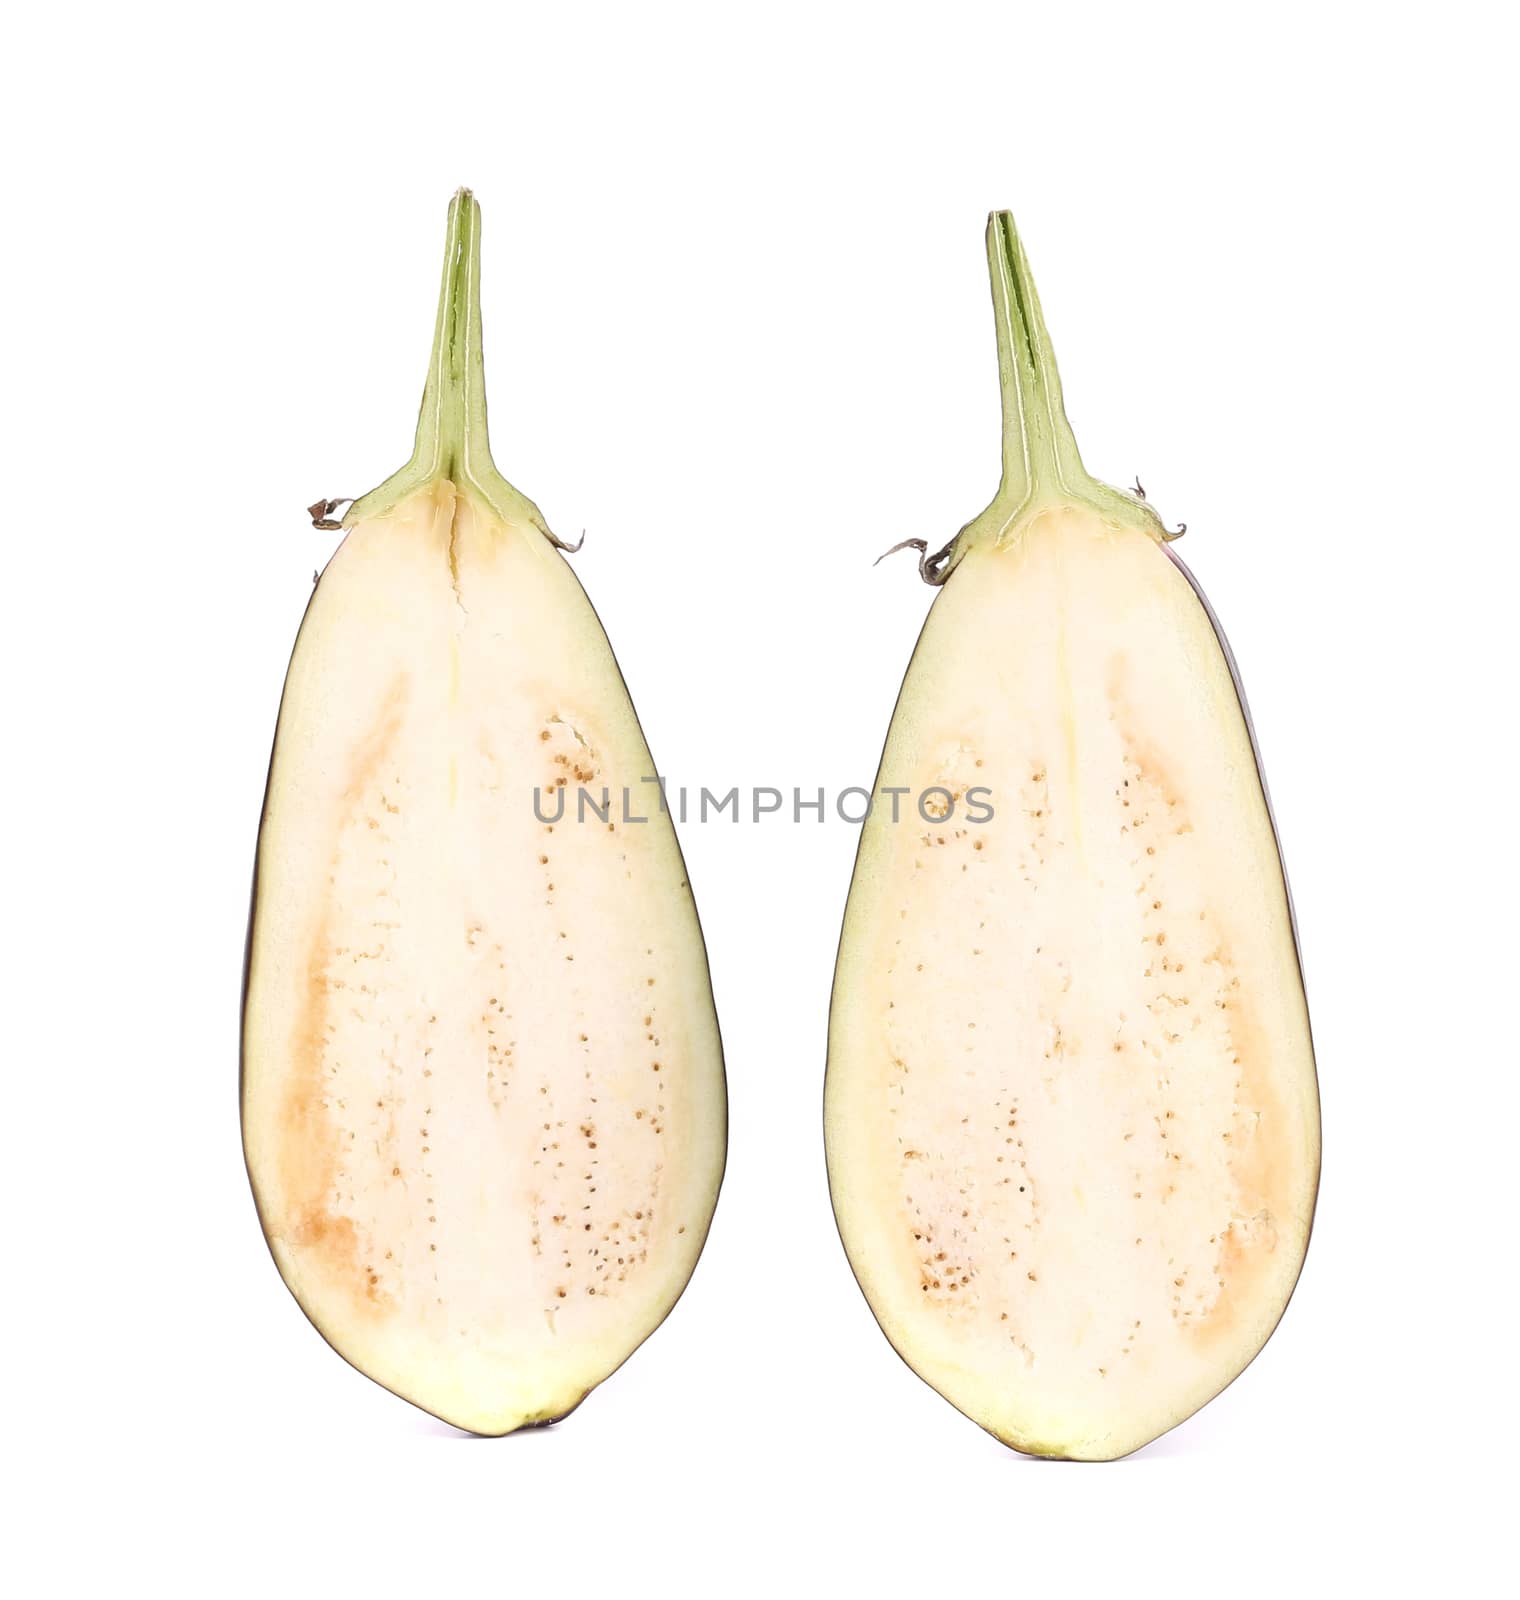 Two halved eggplants. Isolated on a white background.